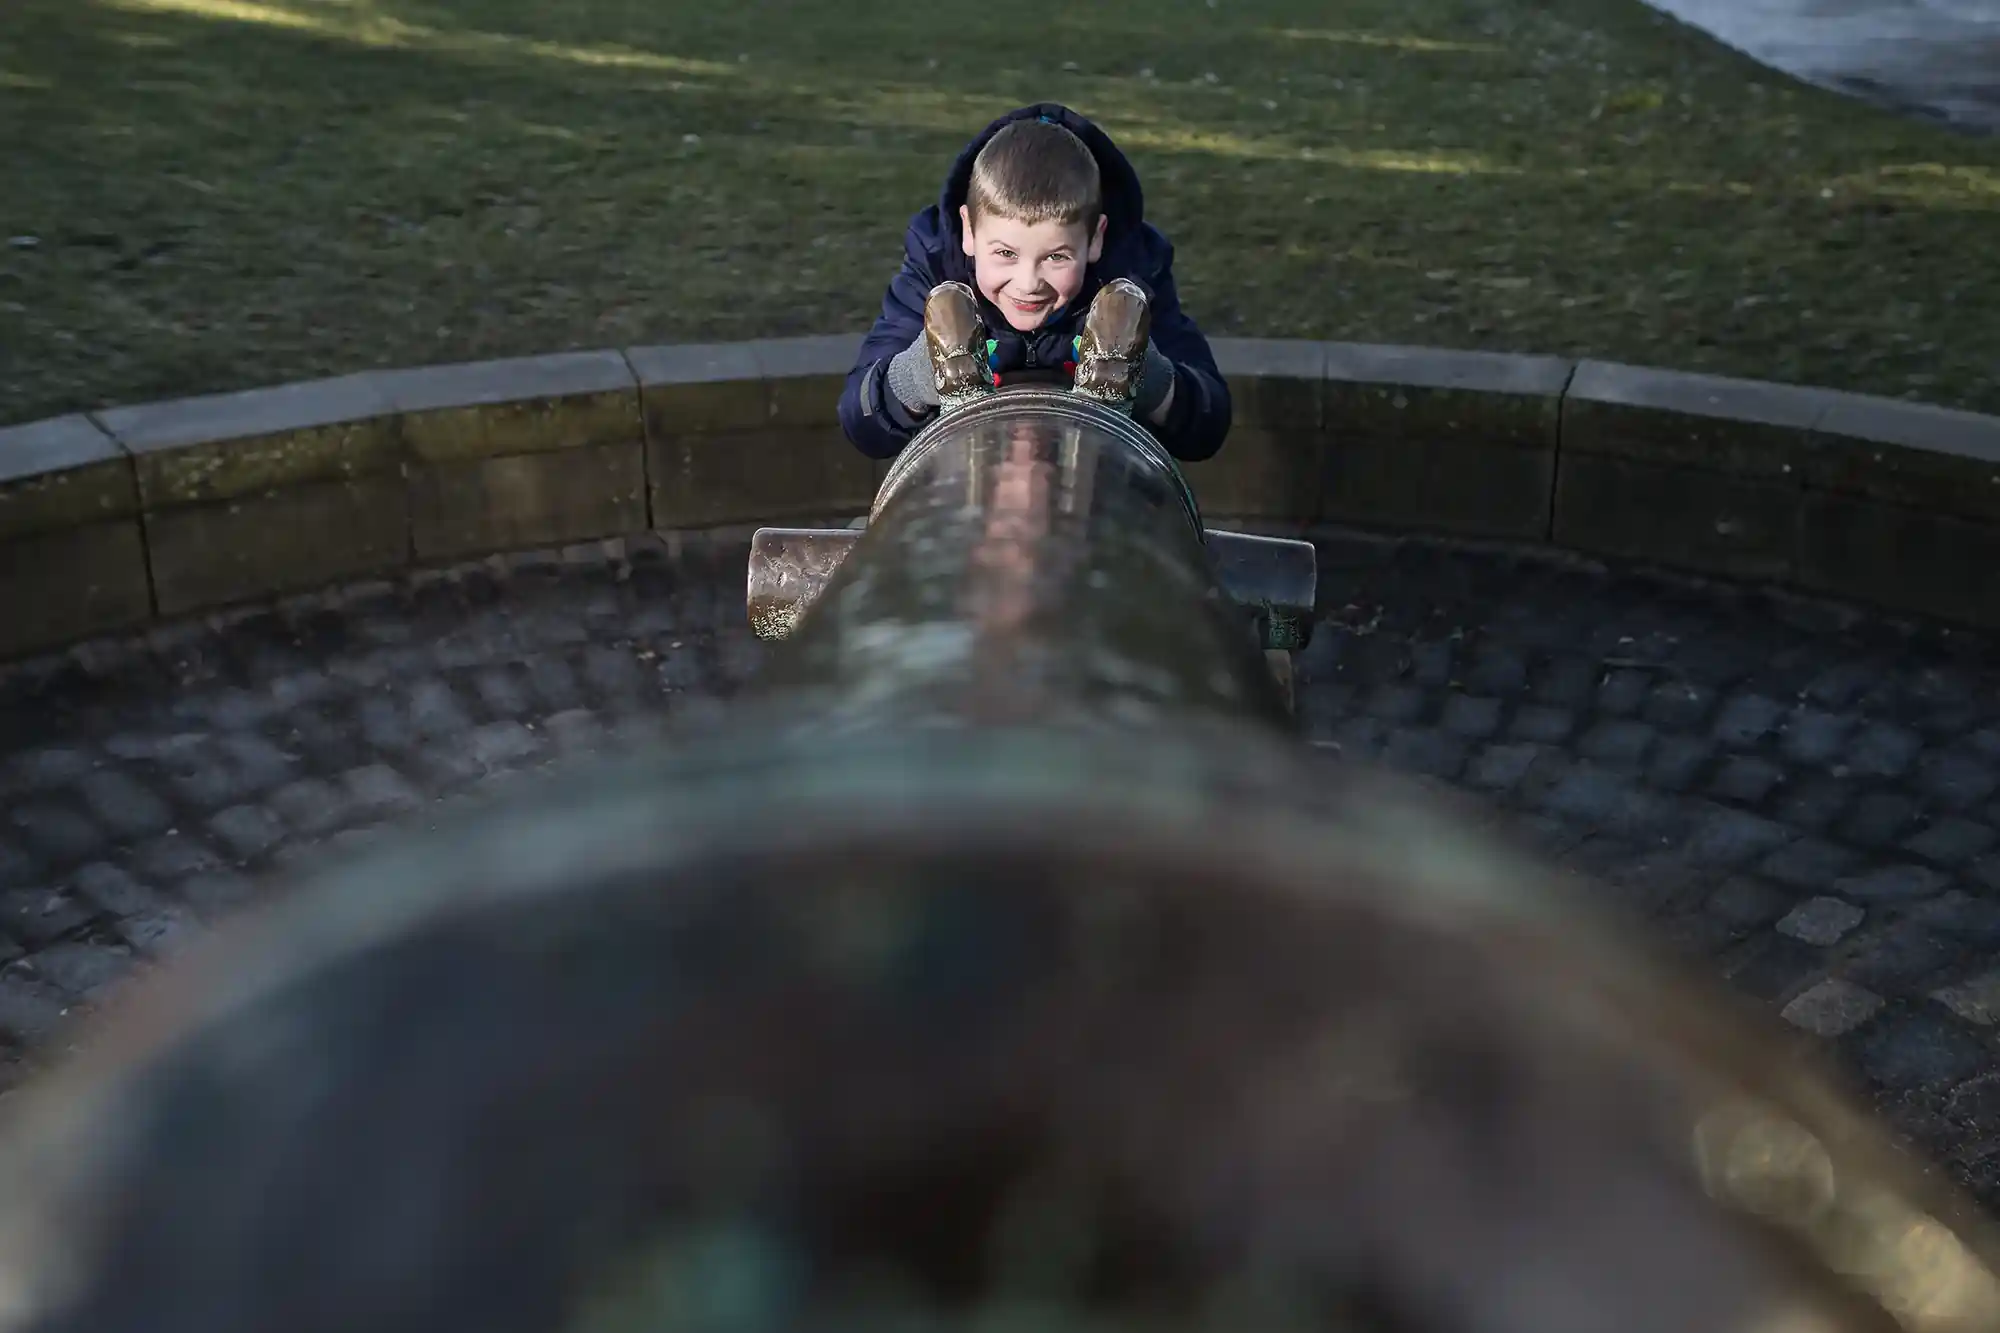 A child is smiling while looking through the barrel of an old cannon in an outdoor setting.